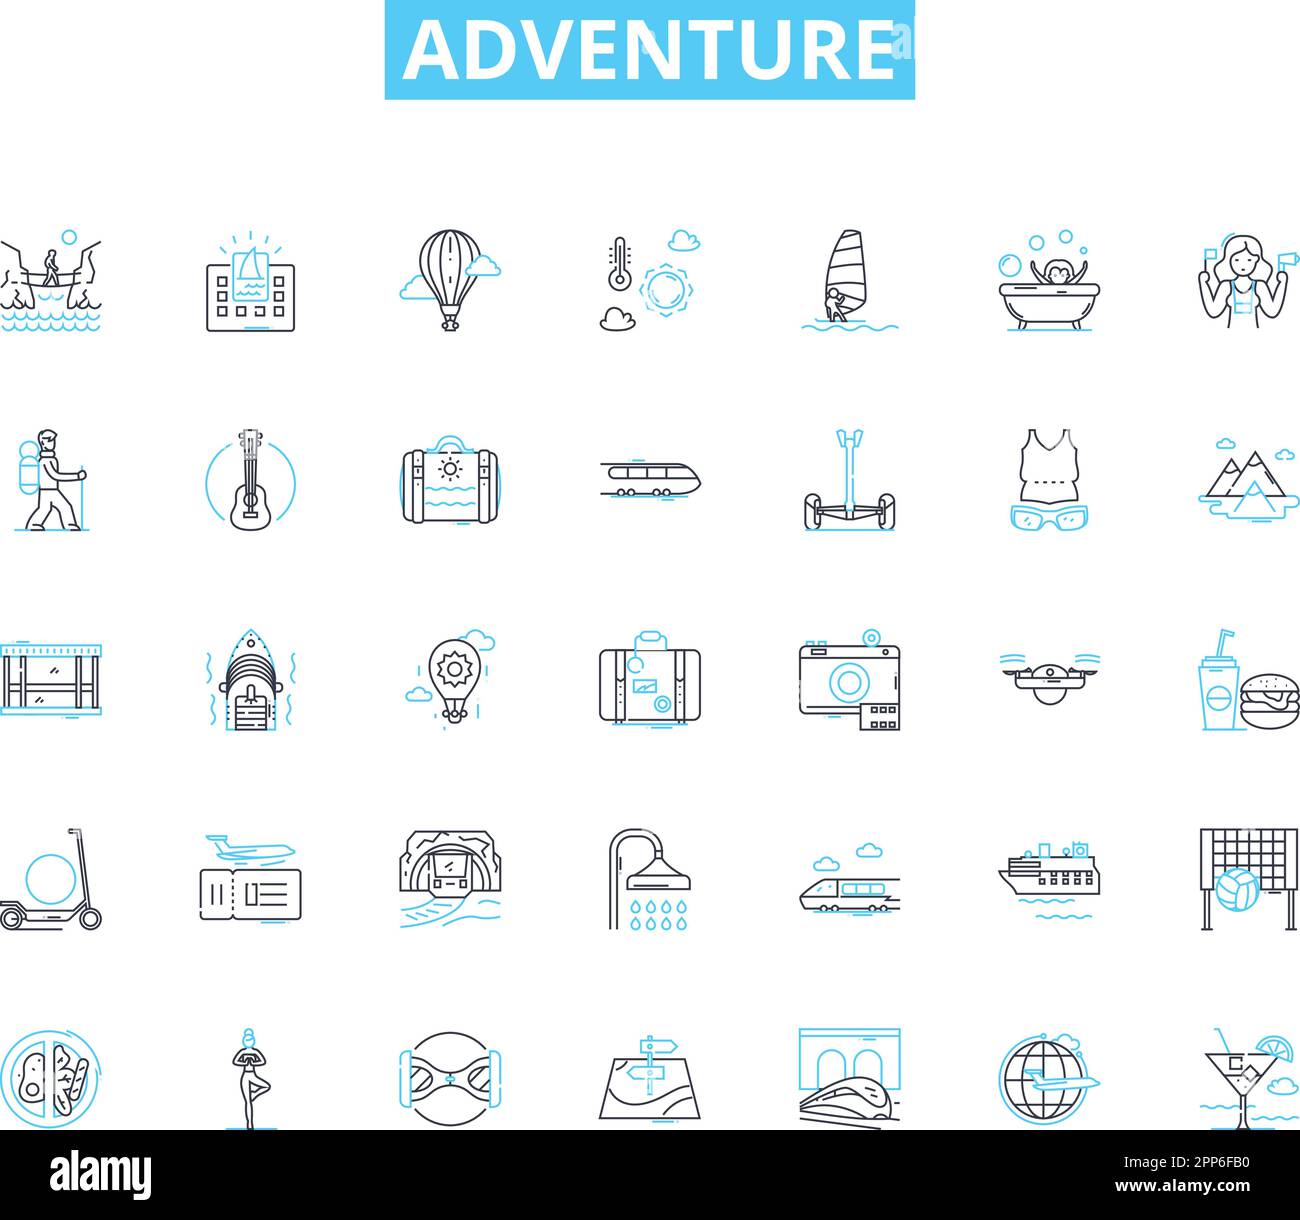 Adventure linear icons set. Exploration, Danger, Excitement, Thrill, Risk, Escape, Journey line vector and concept signs. Expedition,Quest,Odyssey Stock Vector